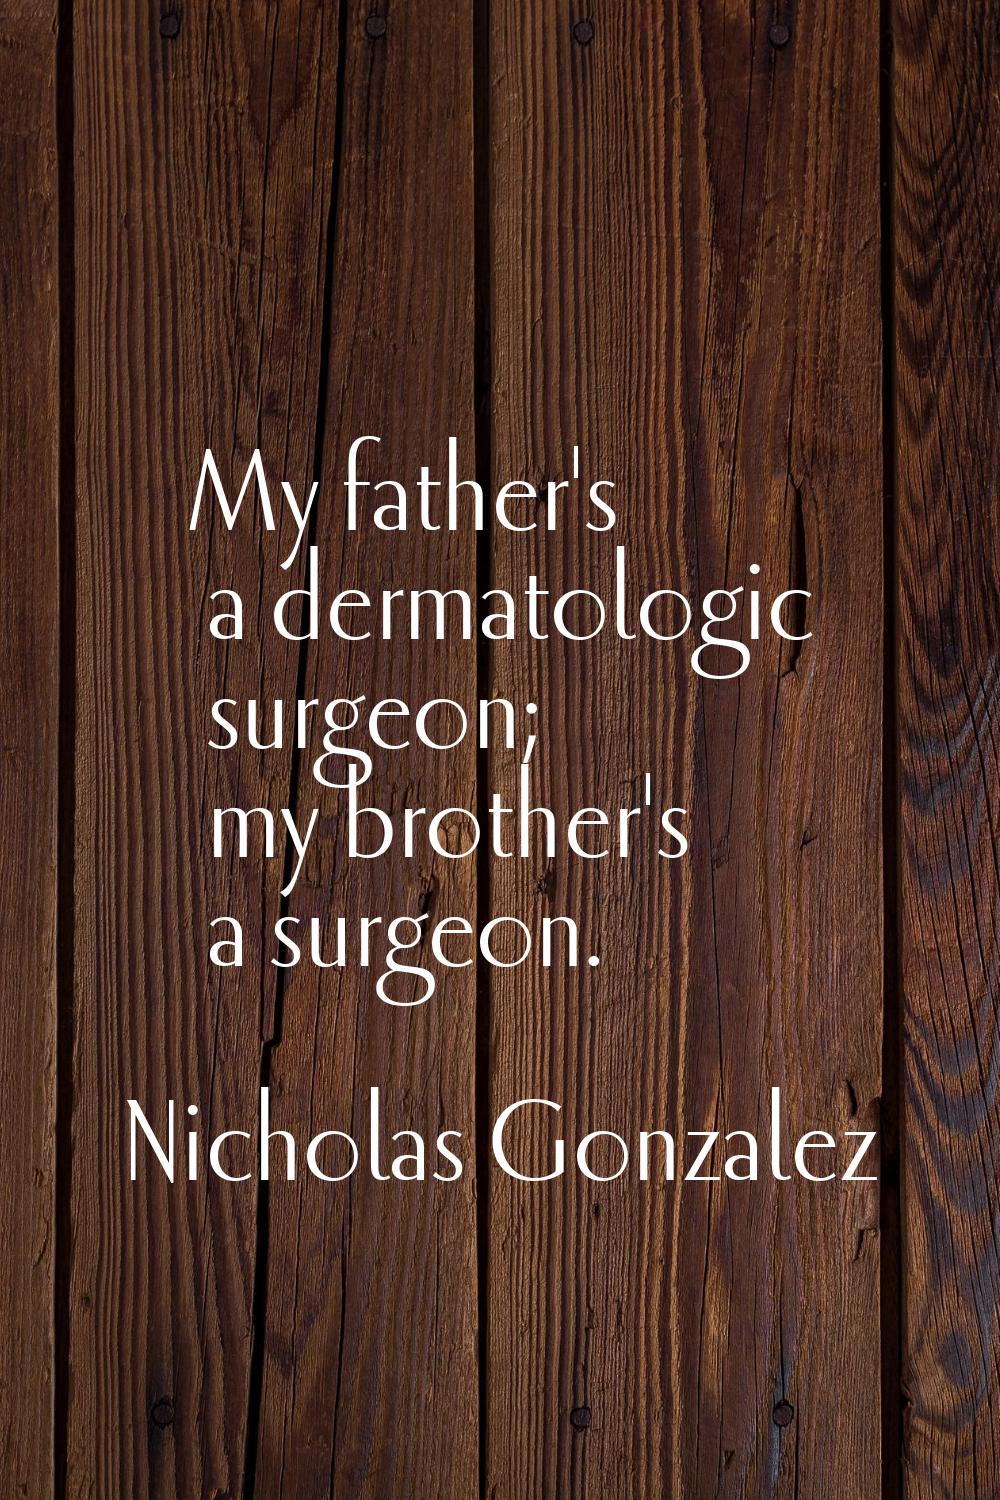 My father's a dermatologic surgeon; my brother's a surgeon.